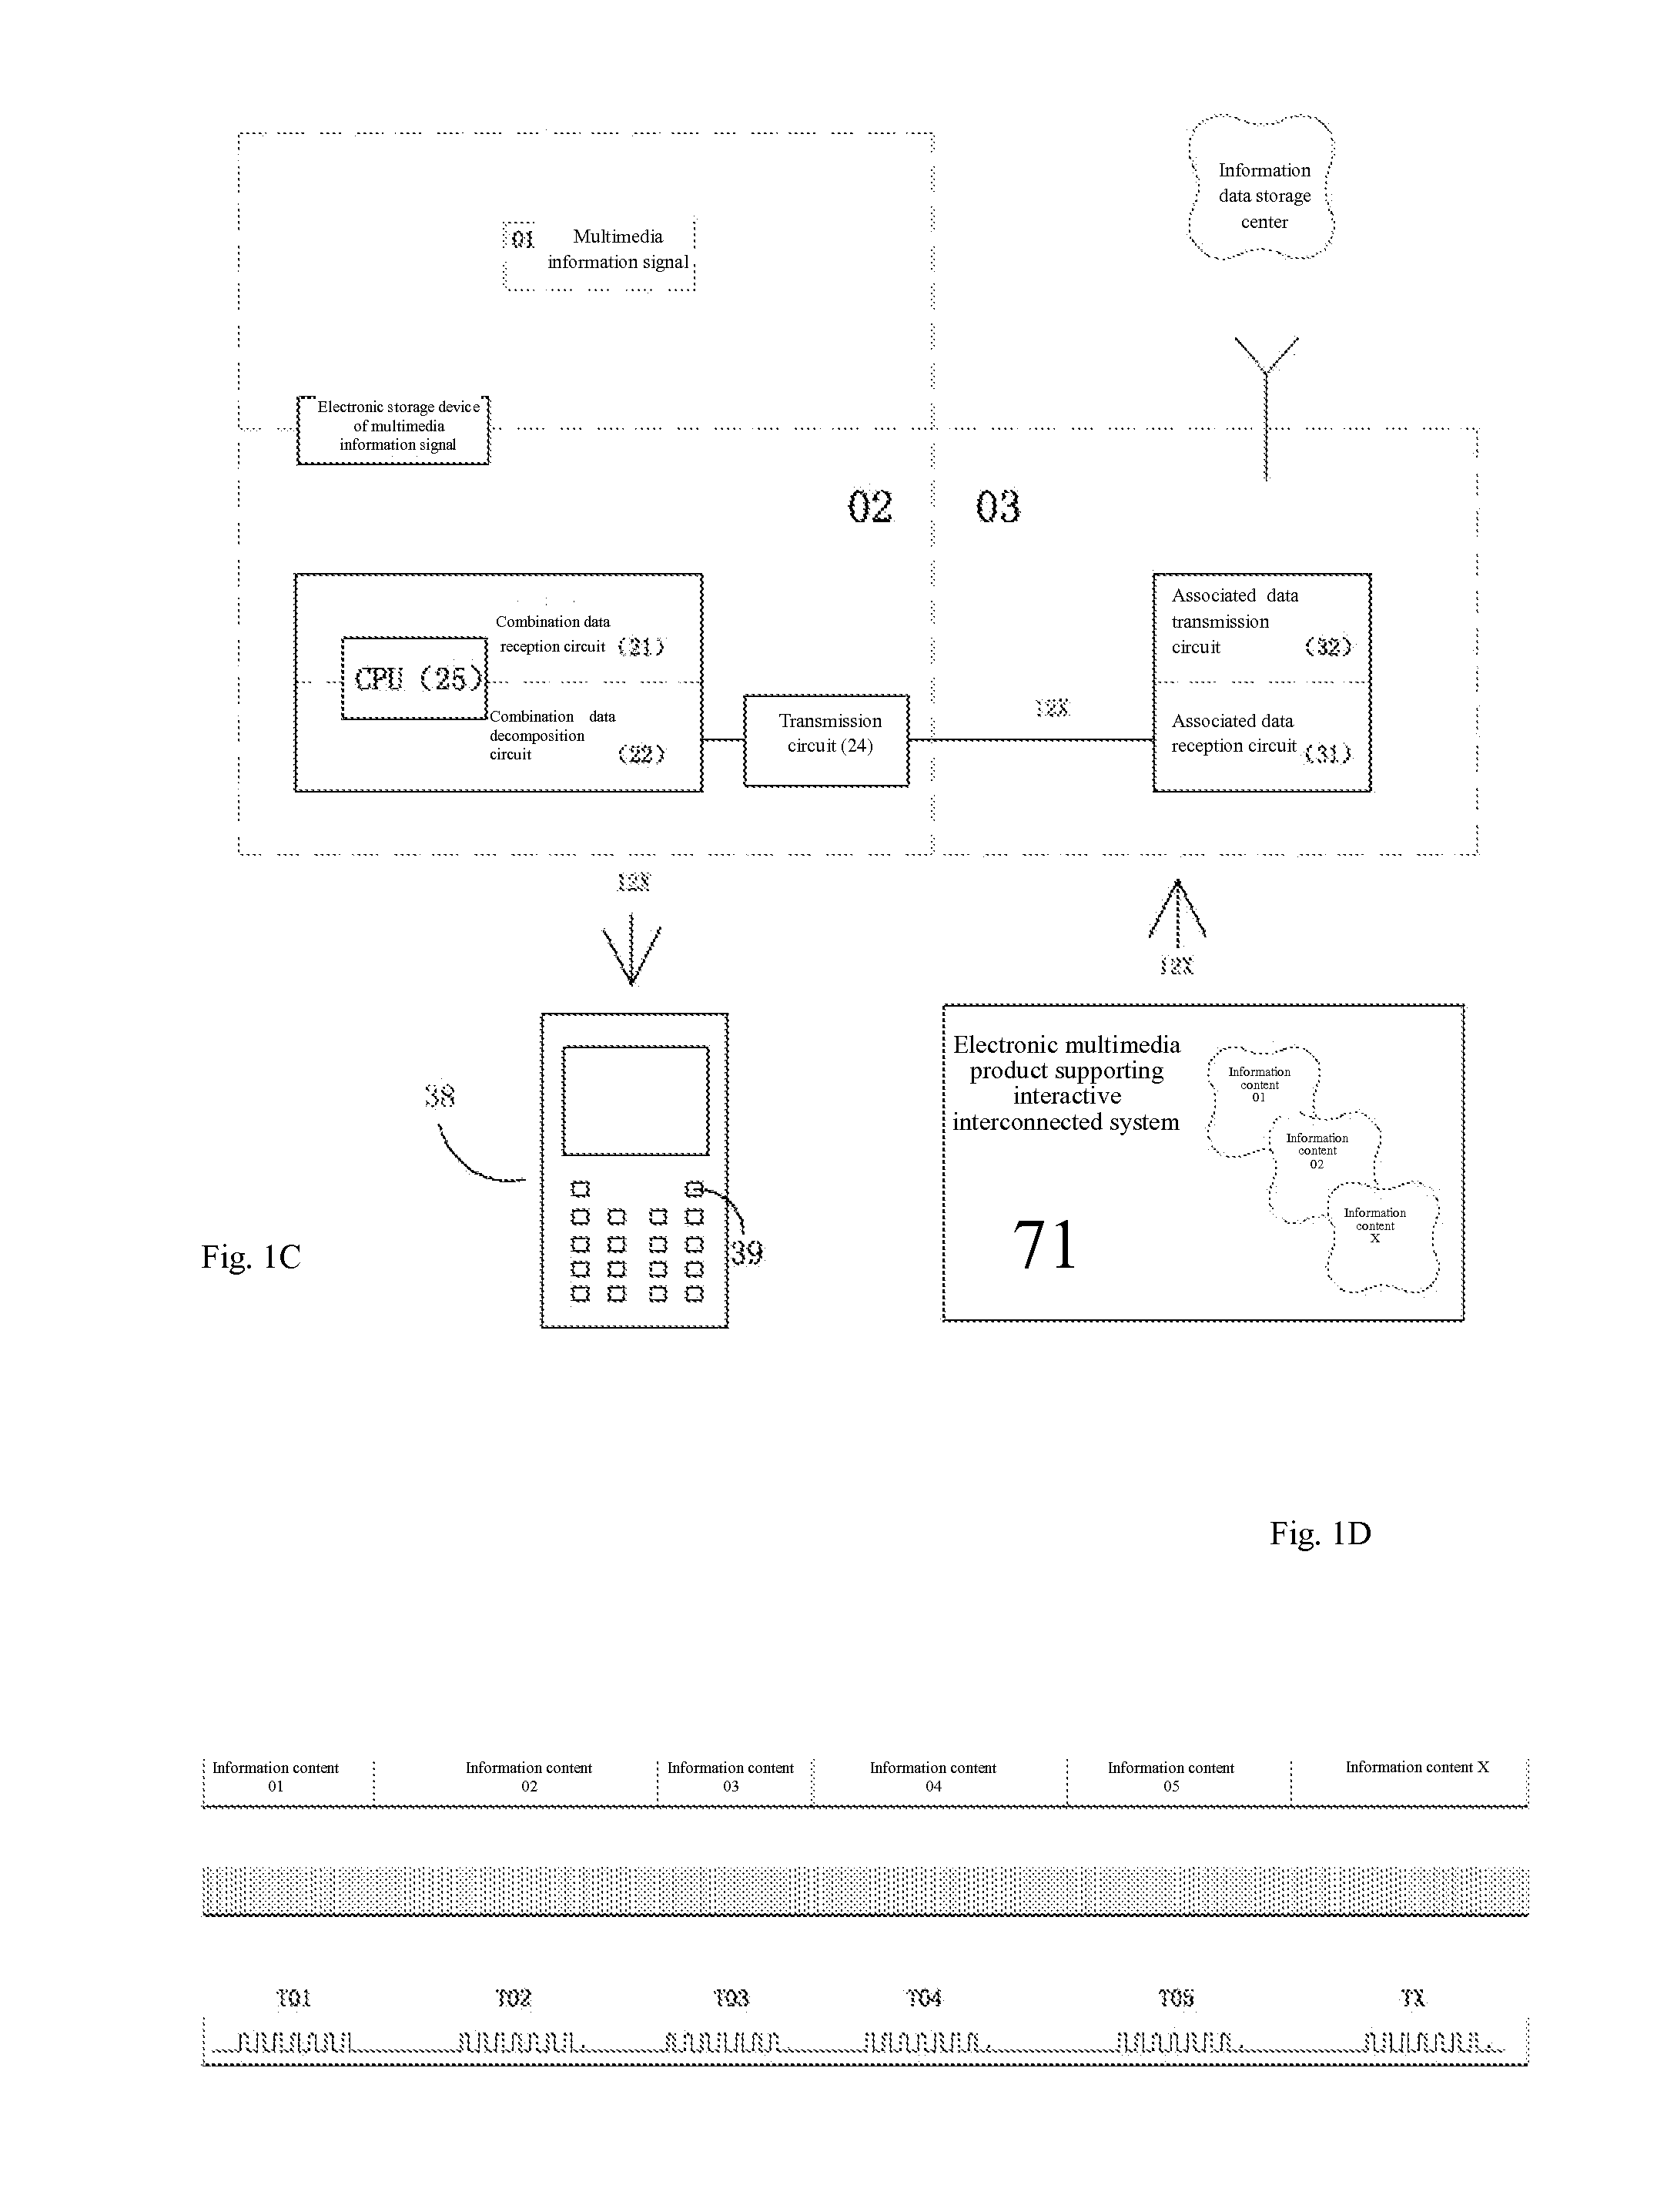 Communication terminal product supporting interactive association system